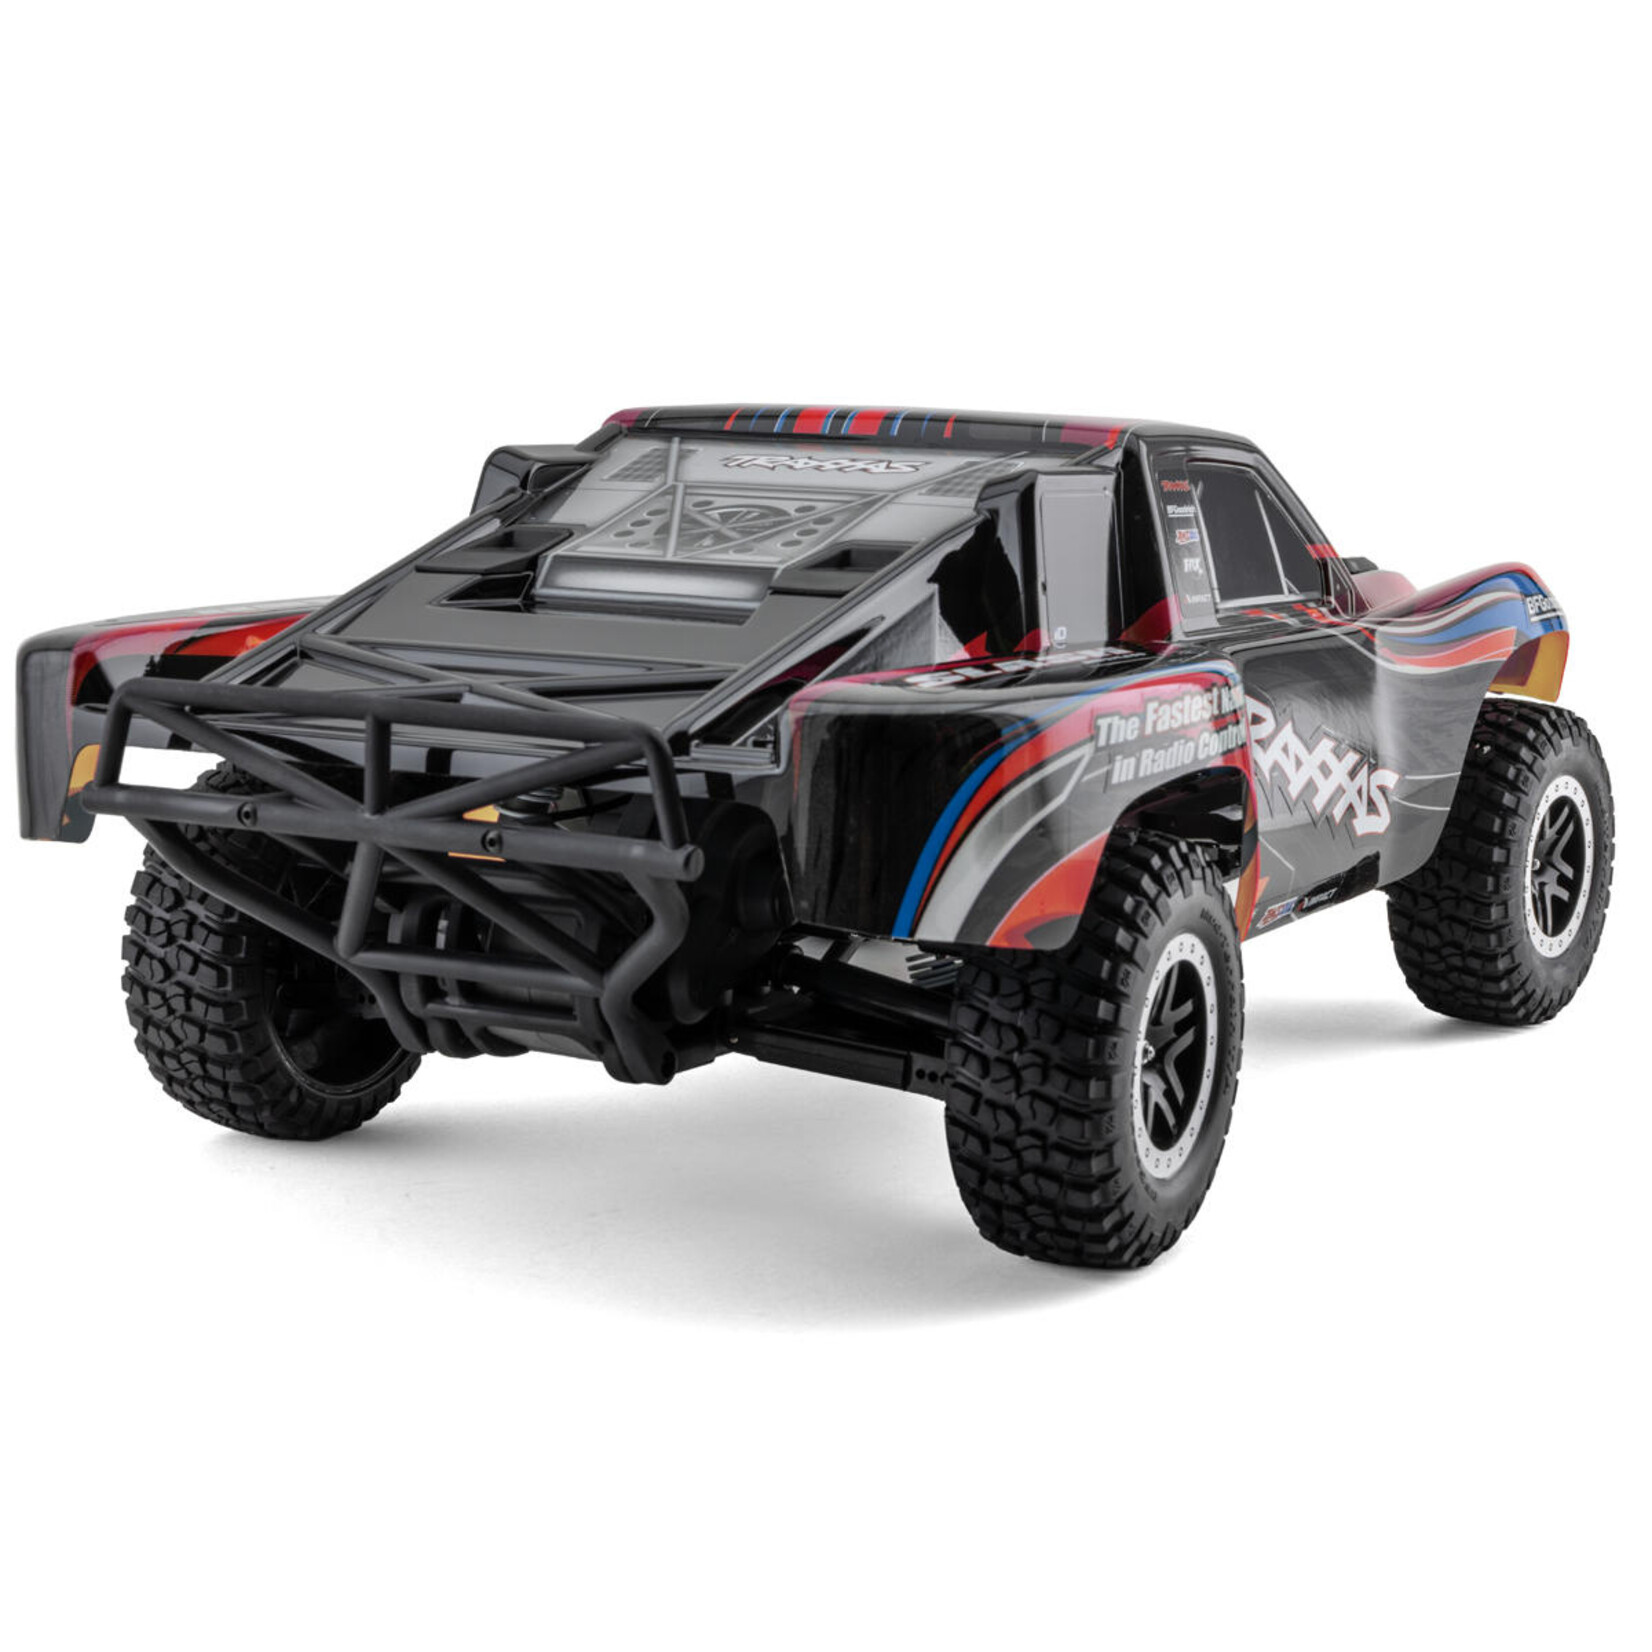 Traxxas Traxxas Slash BL-2S 1/10 RTR 2WD Brushless Short Course Truck (Red) w/BL-2S ESC & TQ 2.4GHz Radio #58134-4-RED